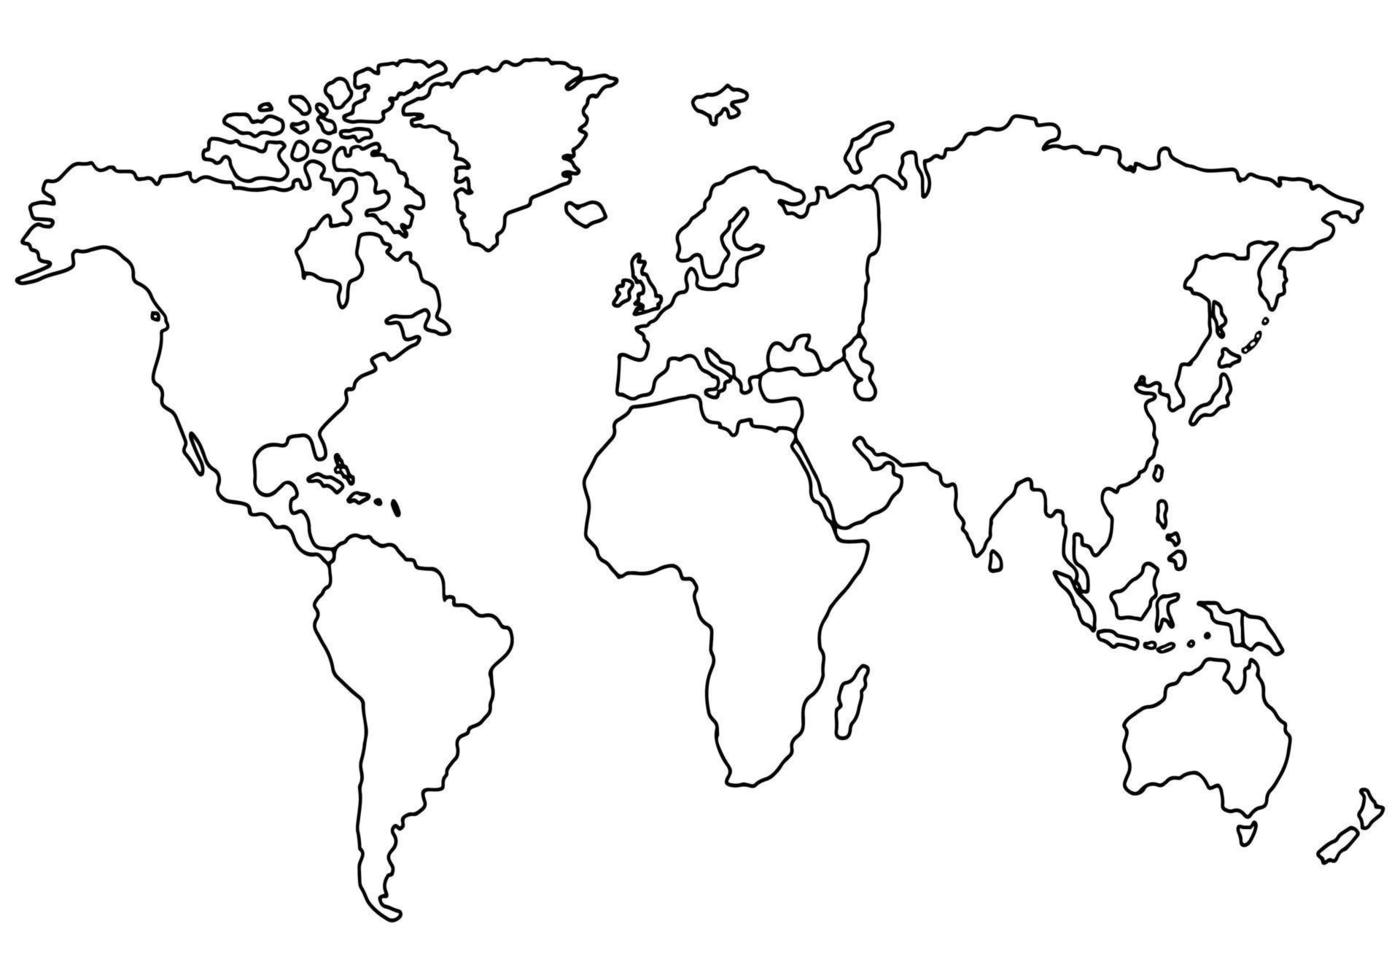 hand drawn world map sketch on white background. vector illustration ...